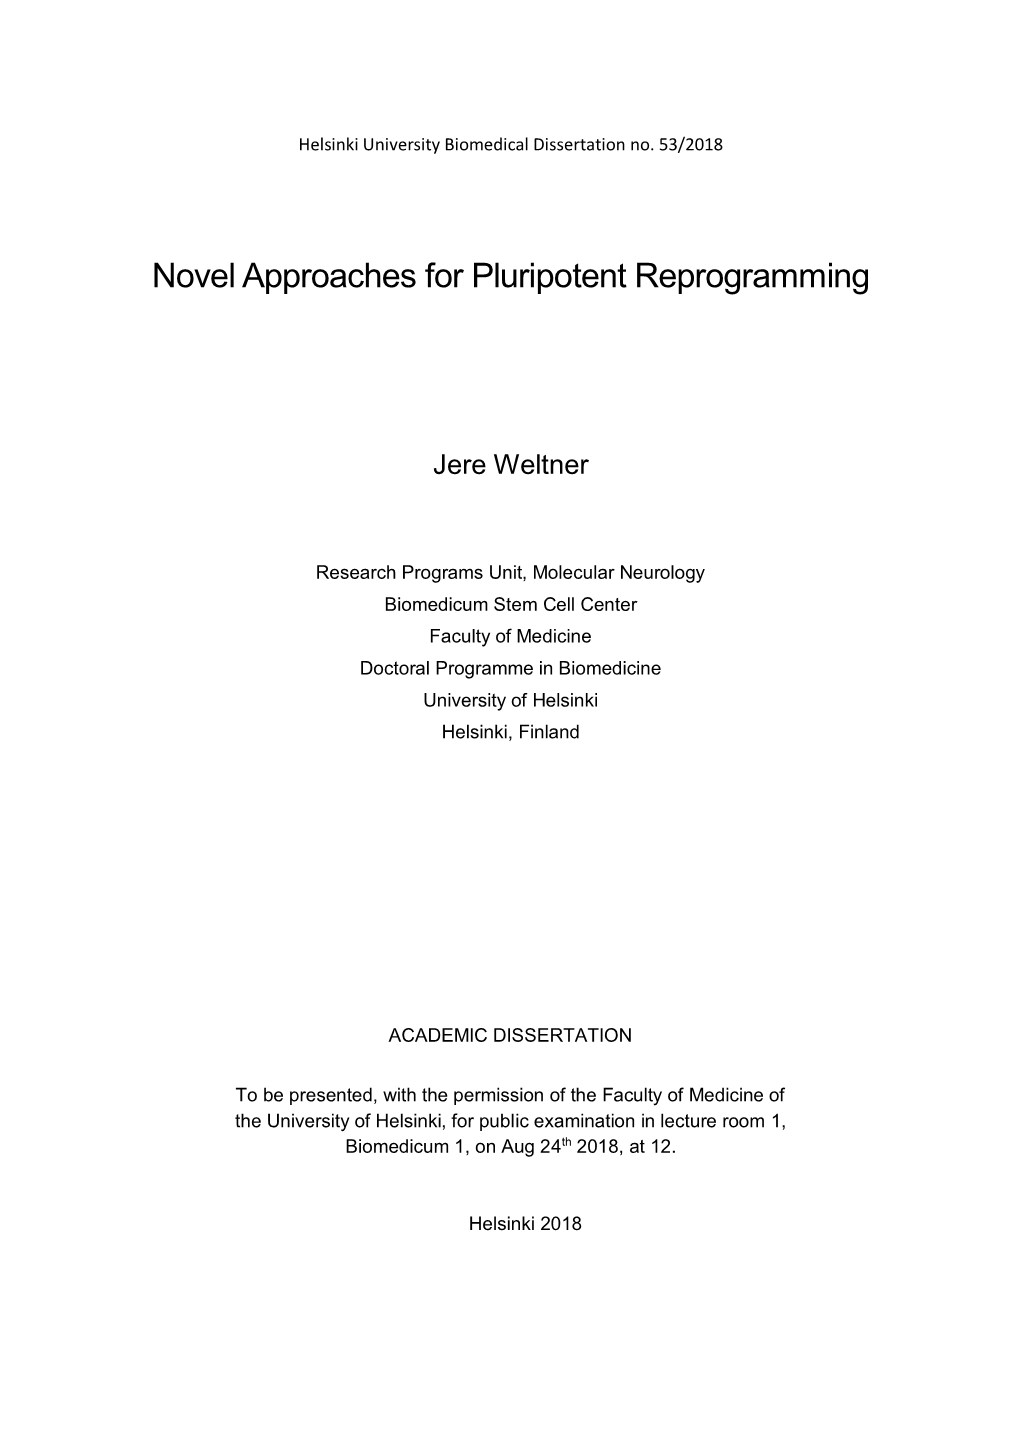 Novel Approaches for Pluripotent Reprogramming